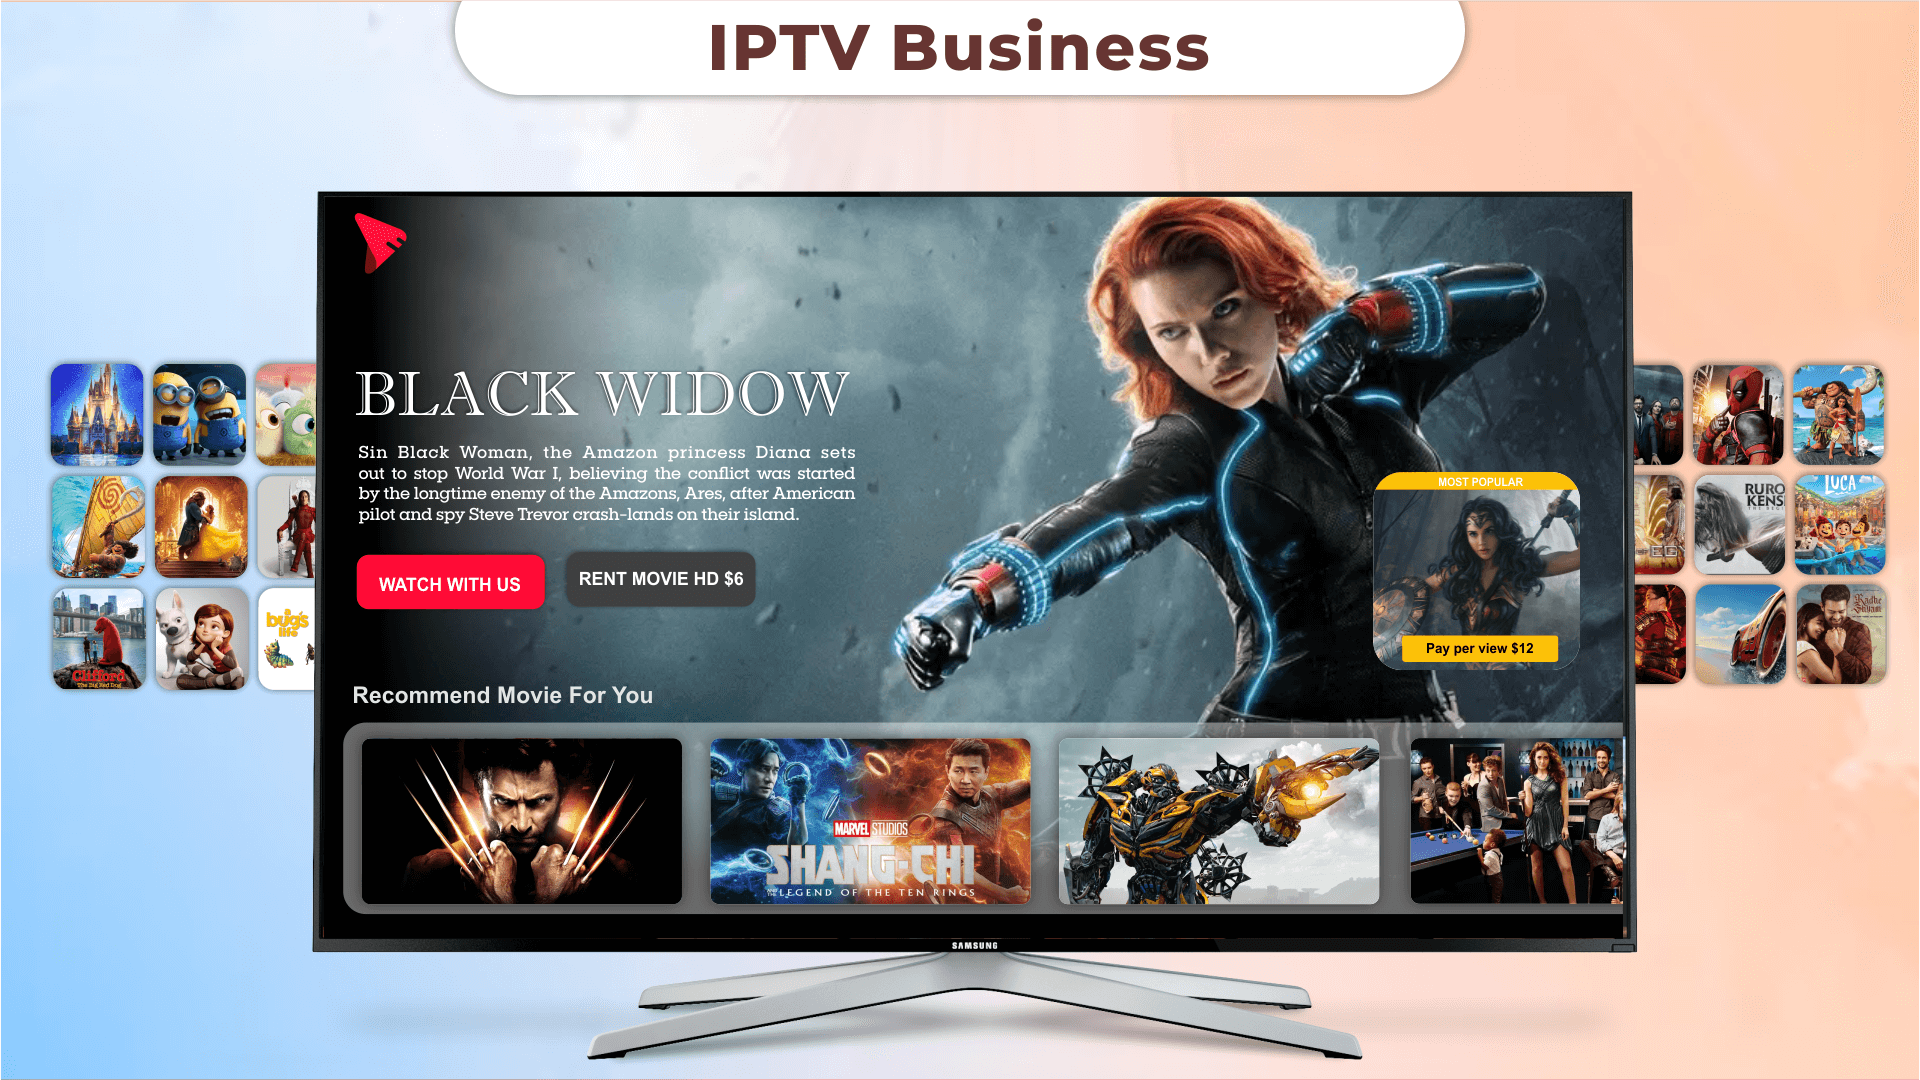 Tips About How to Start an IPTV Business